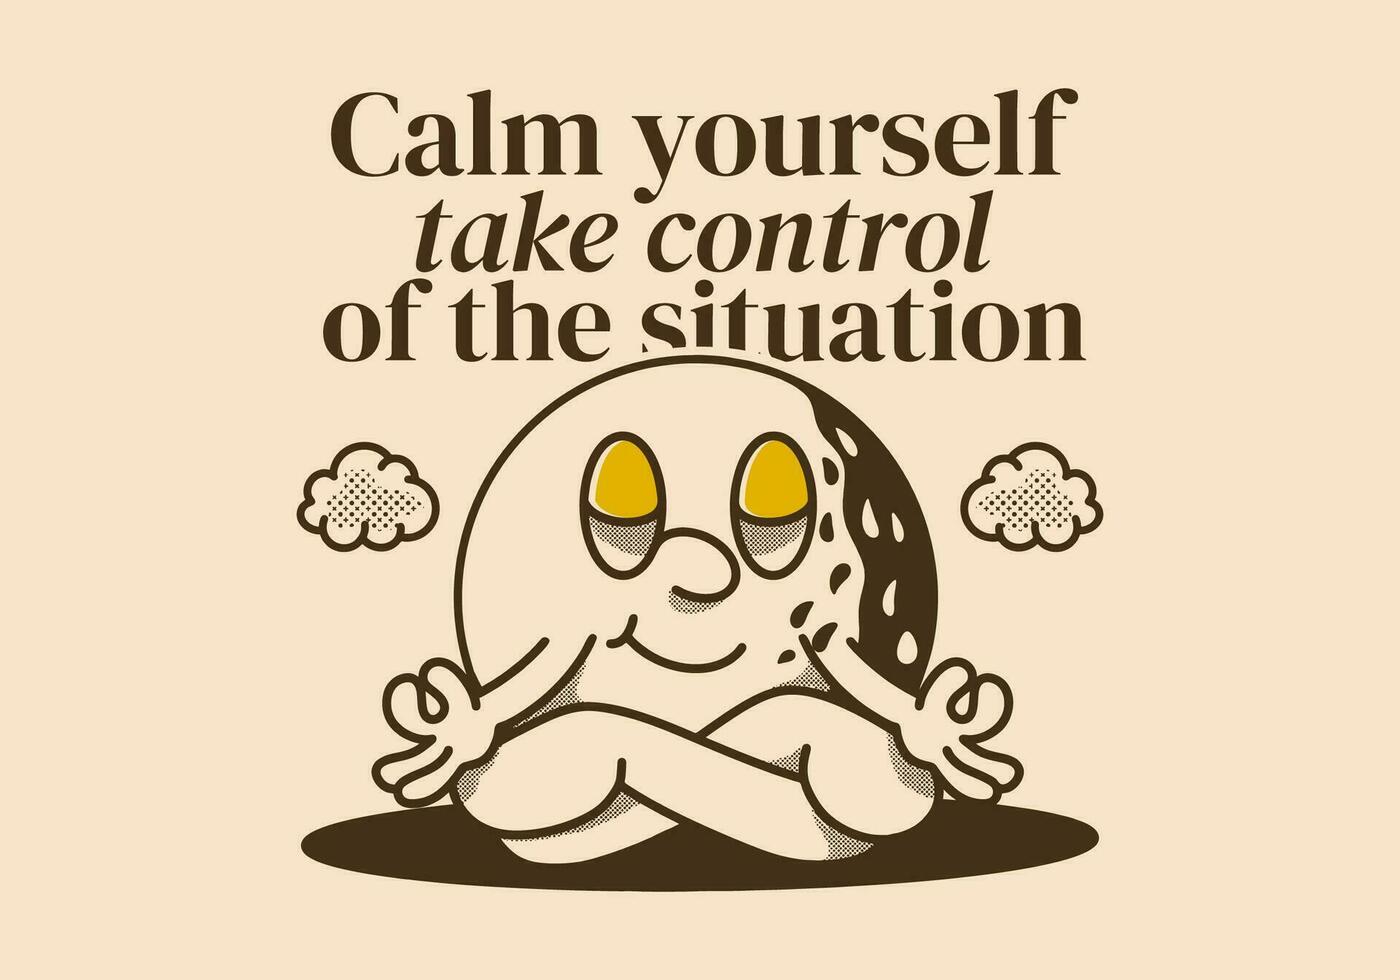 Calm yourself, take control of the situation. Mascot character of golf ball in meditation pose vector